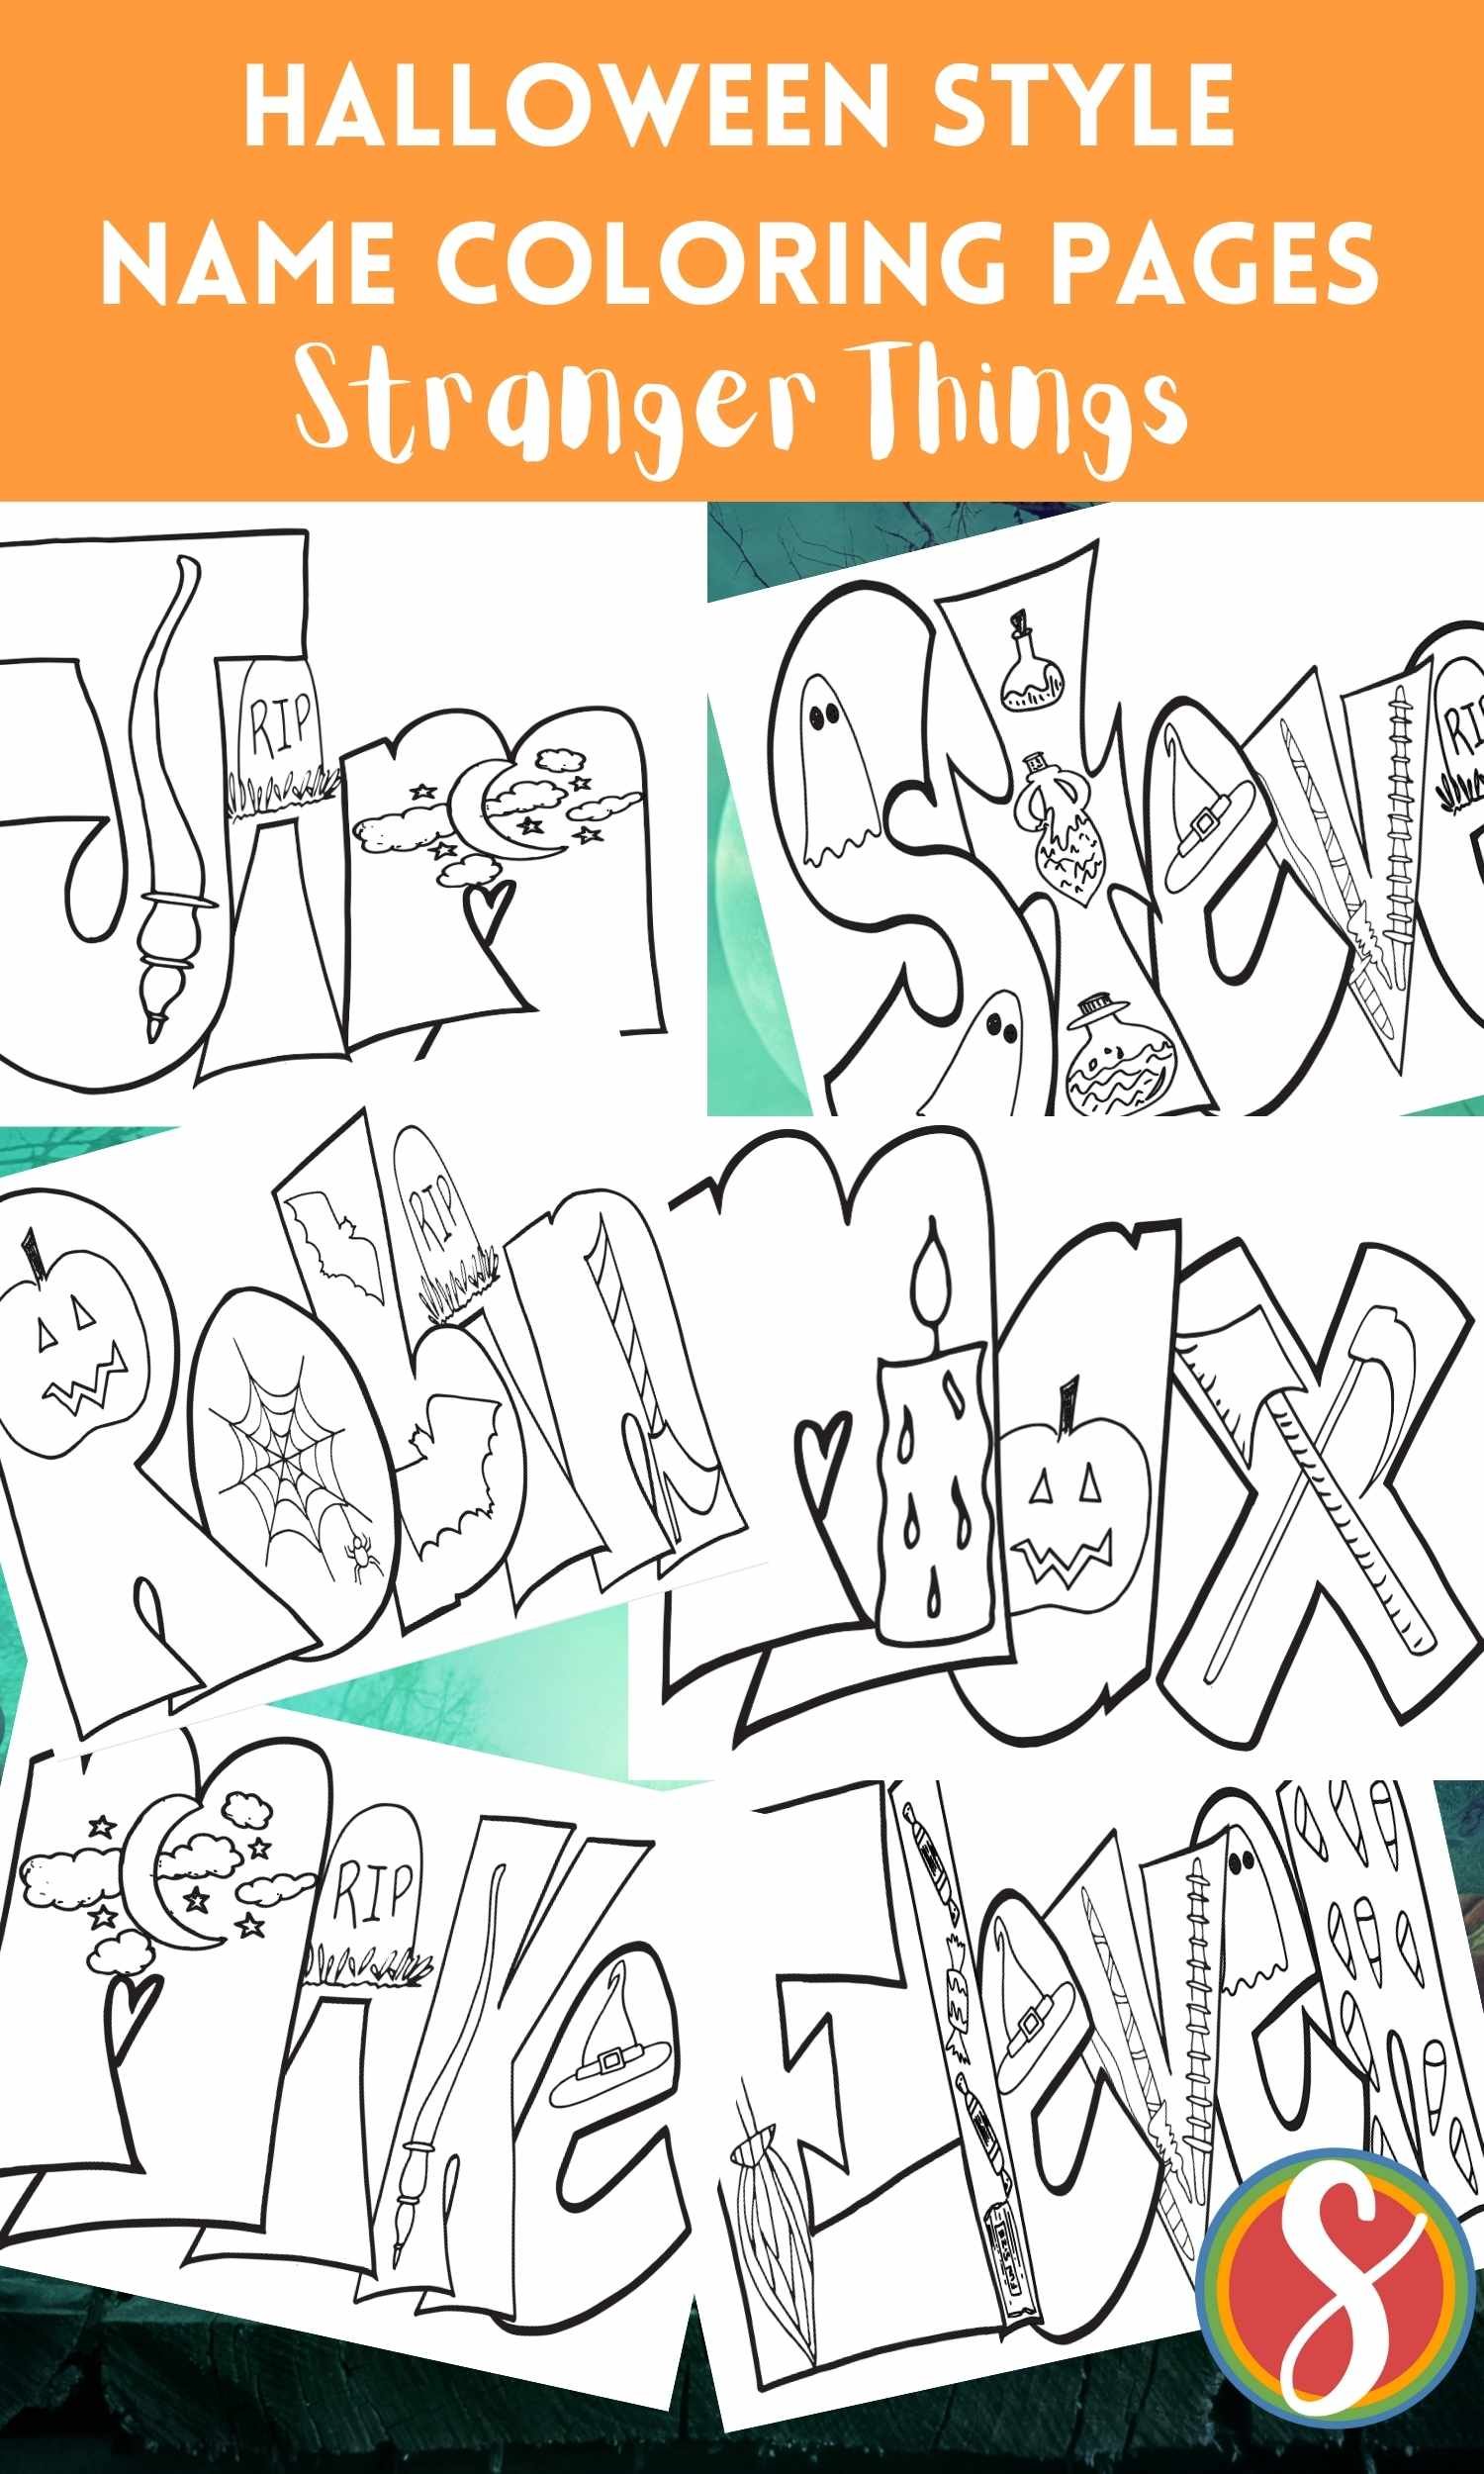 collage of stranger things name coloring pages - bubble letter names with halloween doodles inside to color